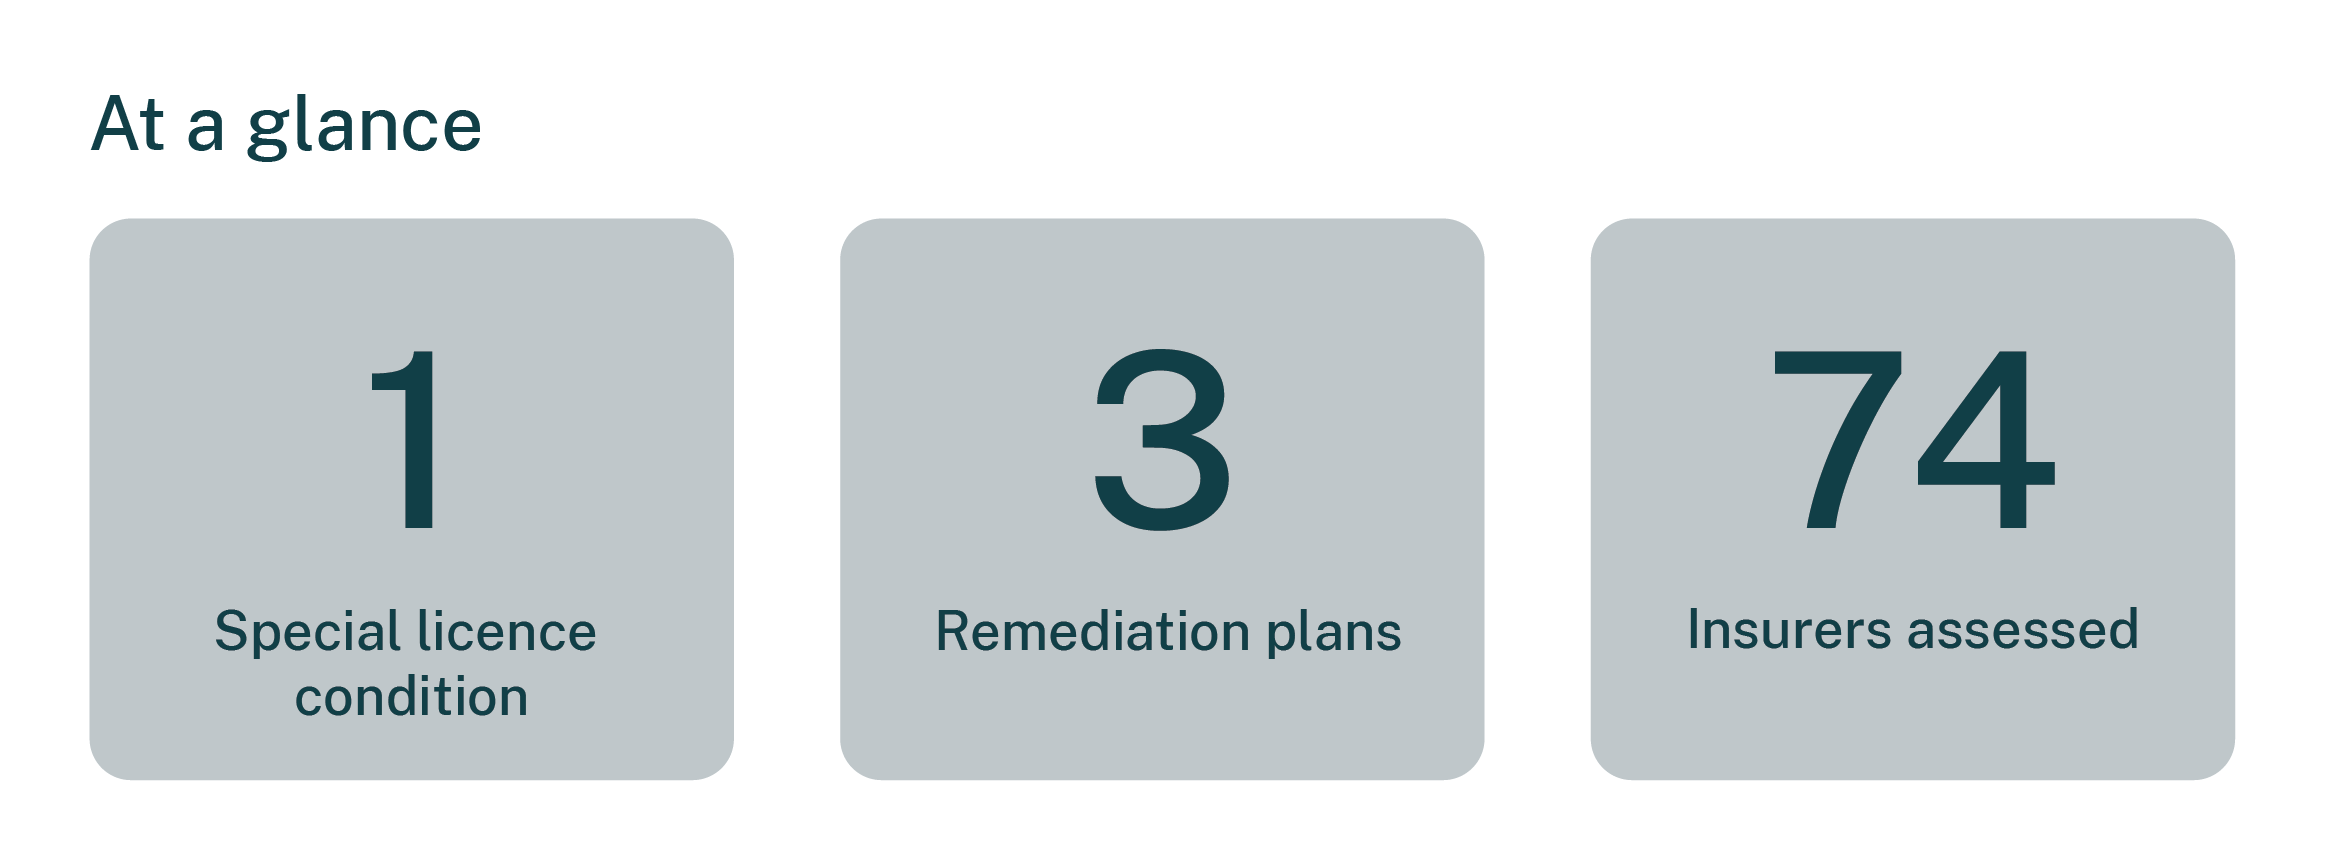 At a glance, SIRA issued 1 special licence condition, 3 remediation plans and 74 insurers were assessed